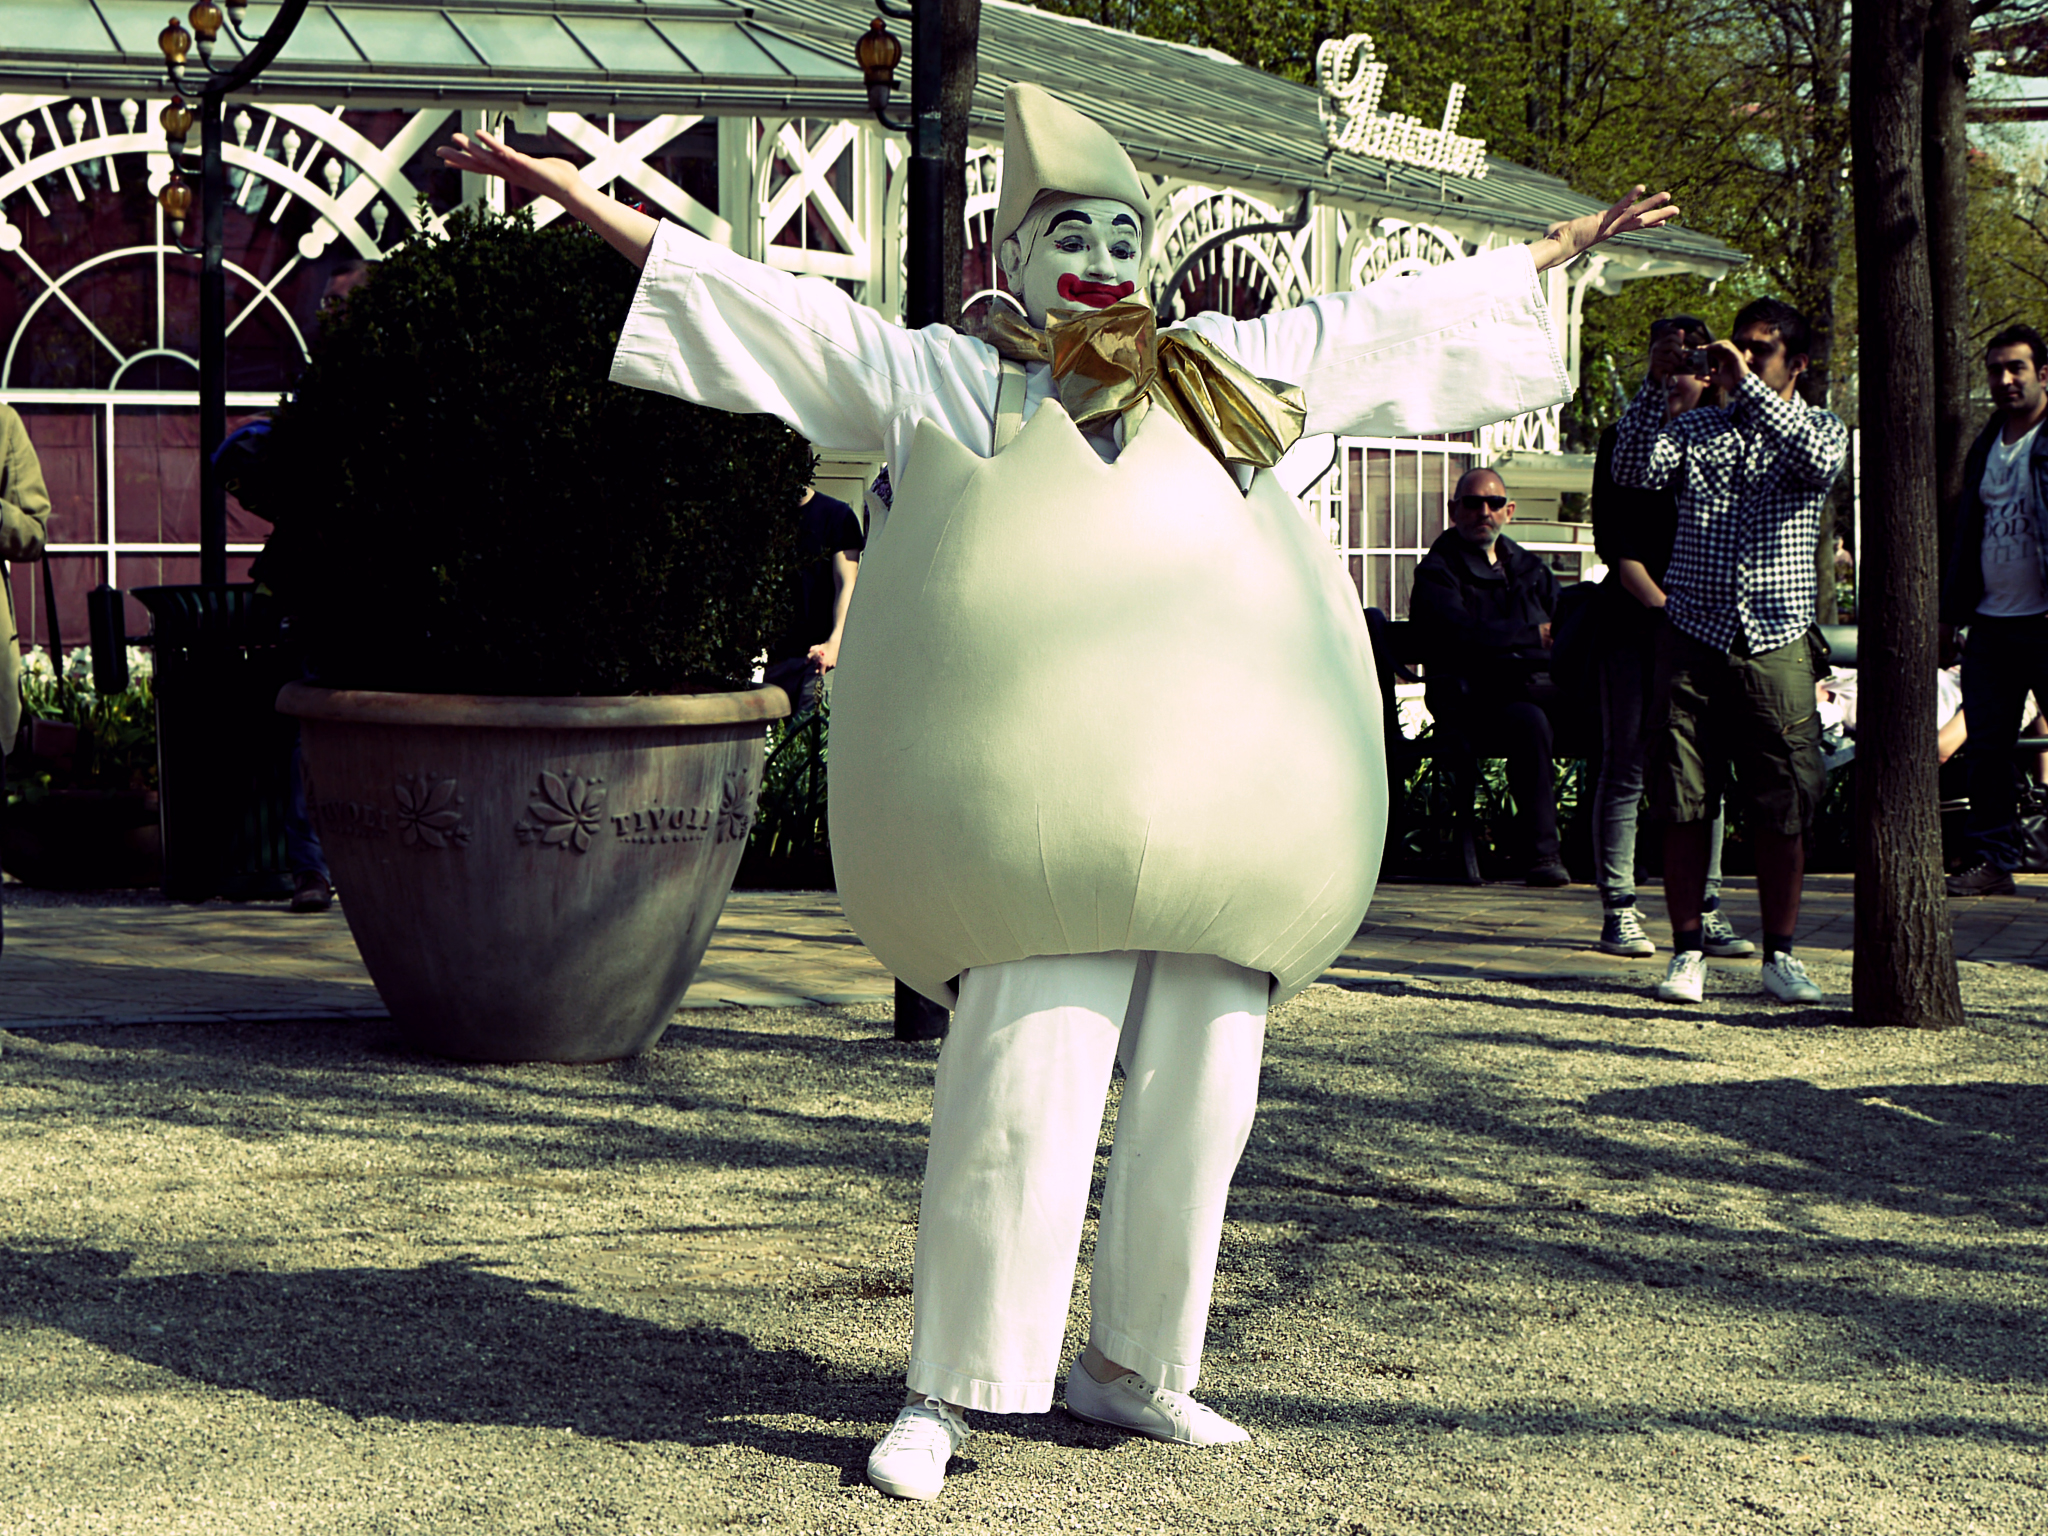 large white man in a full costume stands in the park